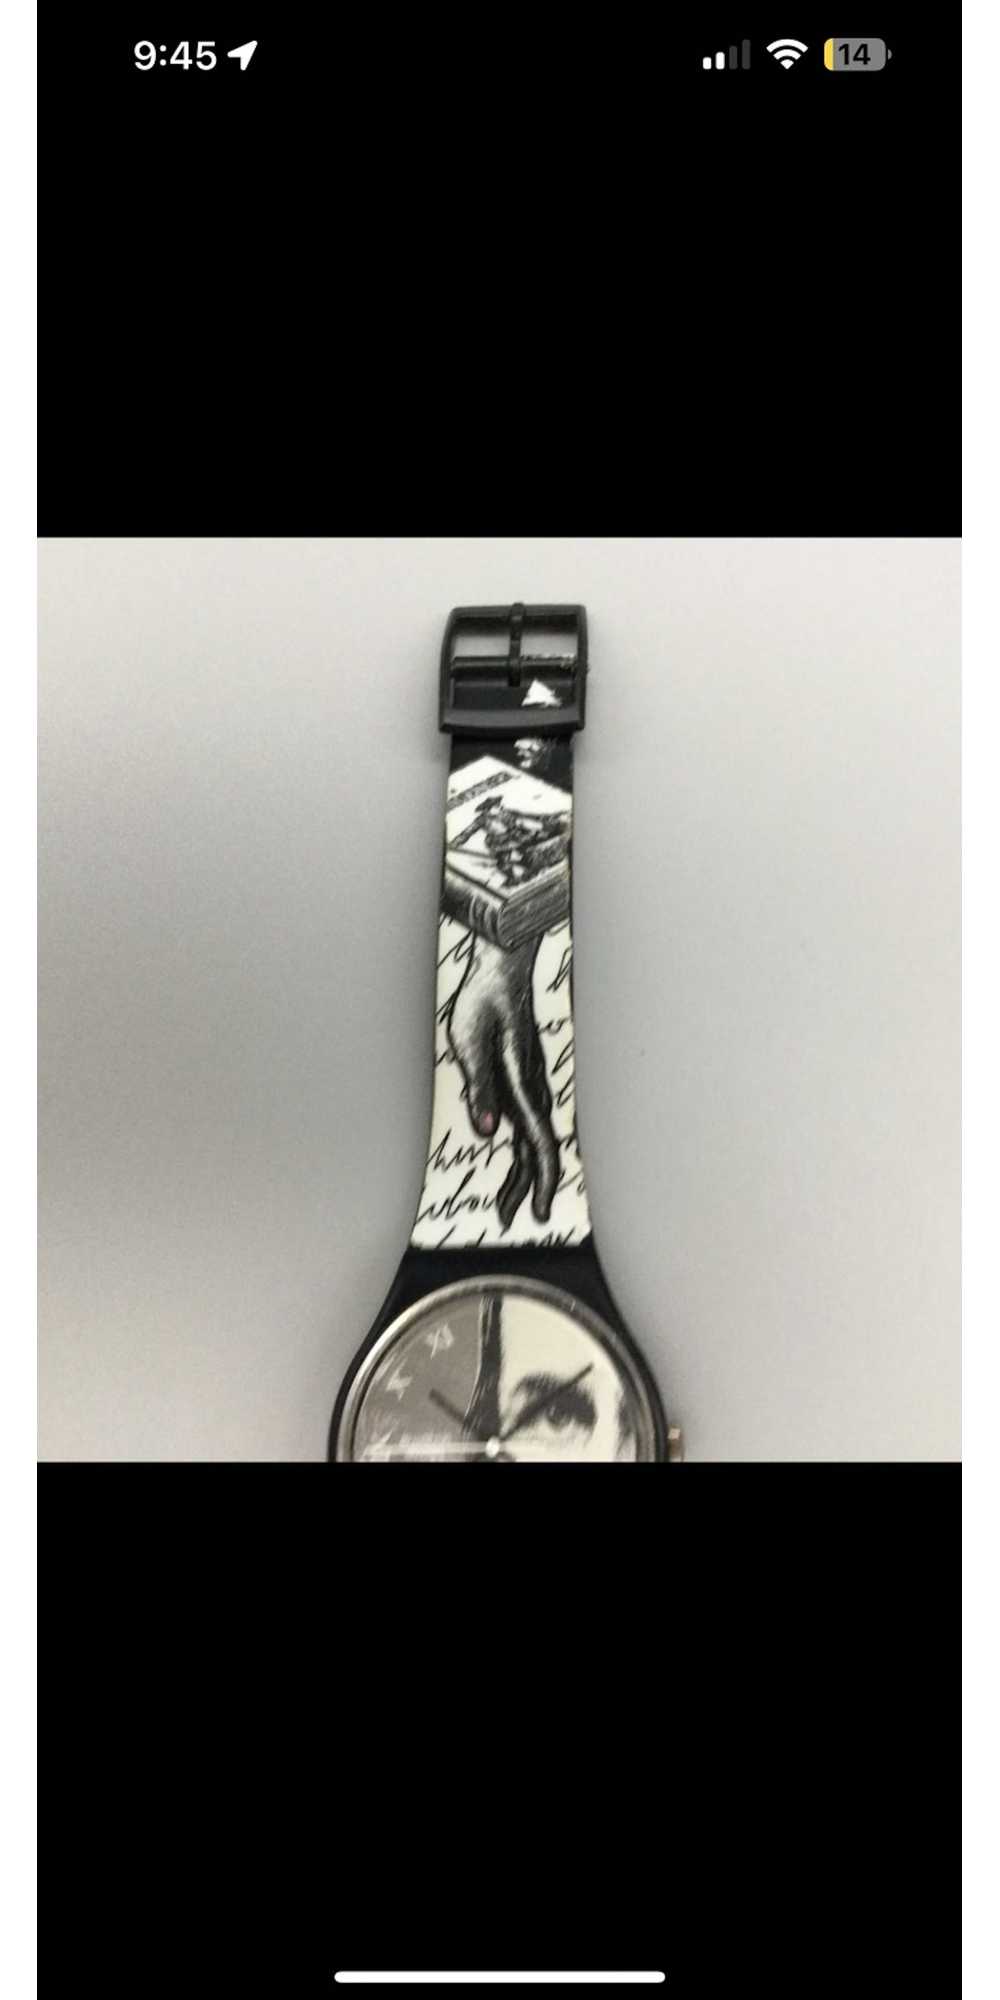 Swatch 1991 Fornasetti Swatch - image 4